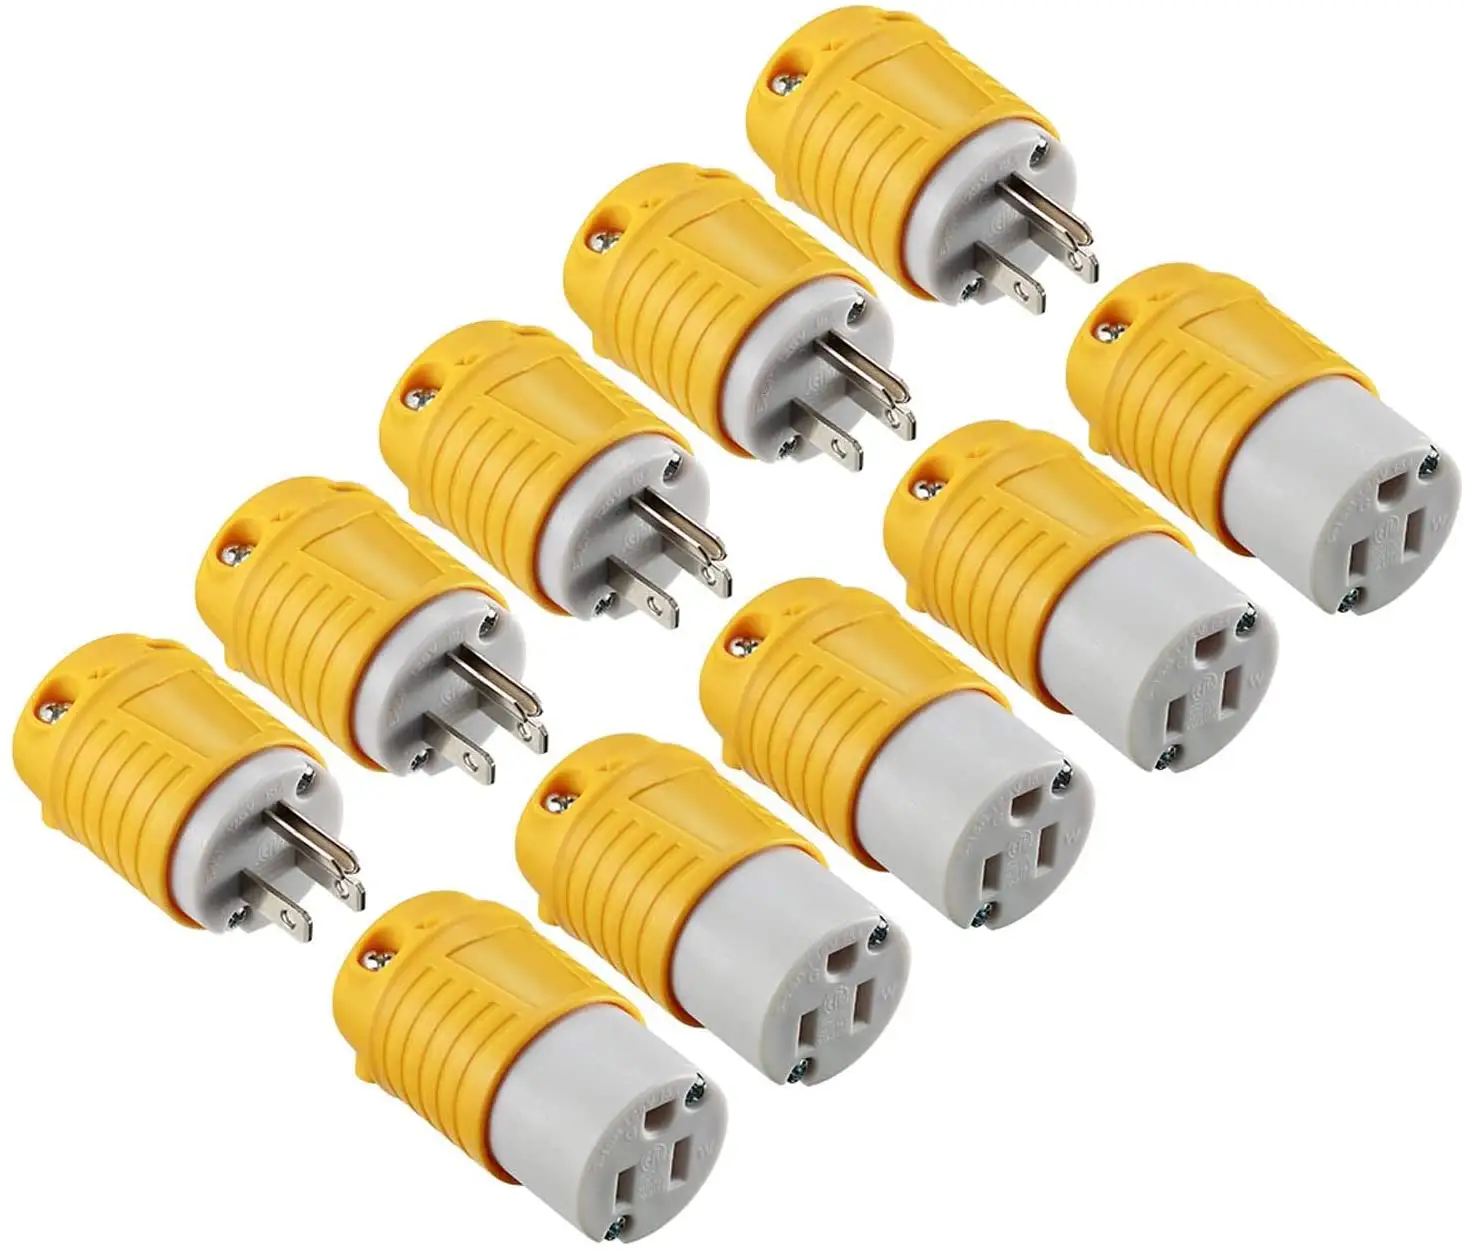 RC-1 Extension Cord Ends 5-15P Male and 5-15R Female, 15 Amp 125 Volt Replacement Plug & Connector Set, ETL listed (5 SET)